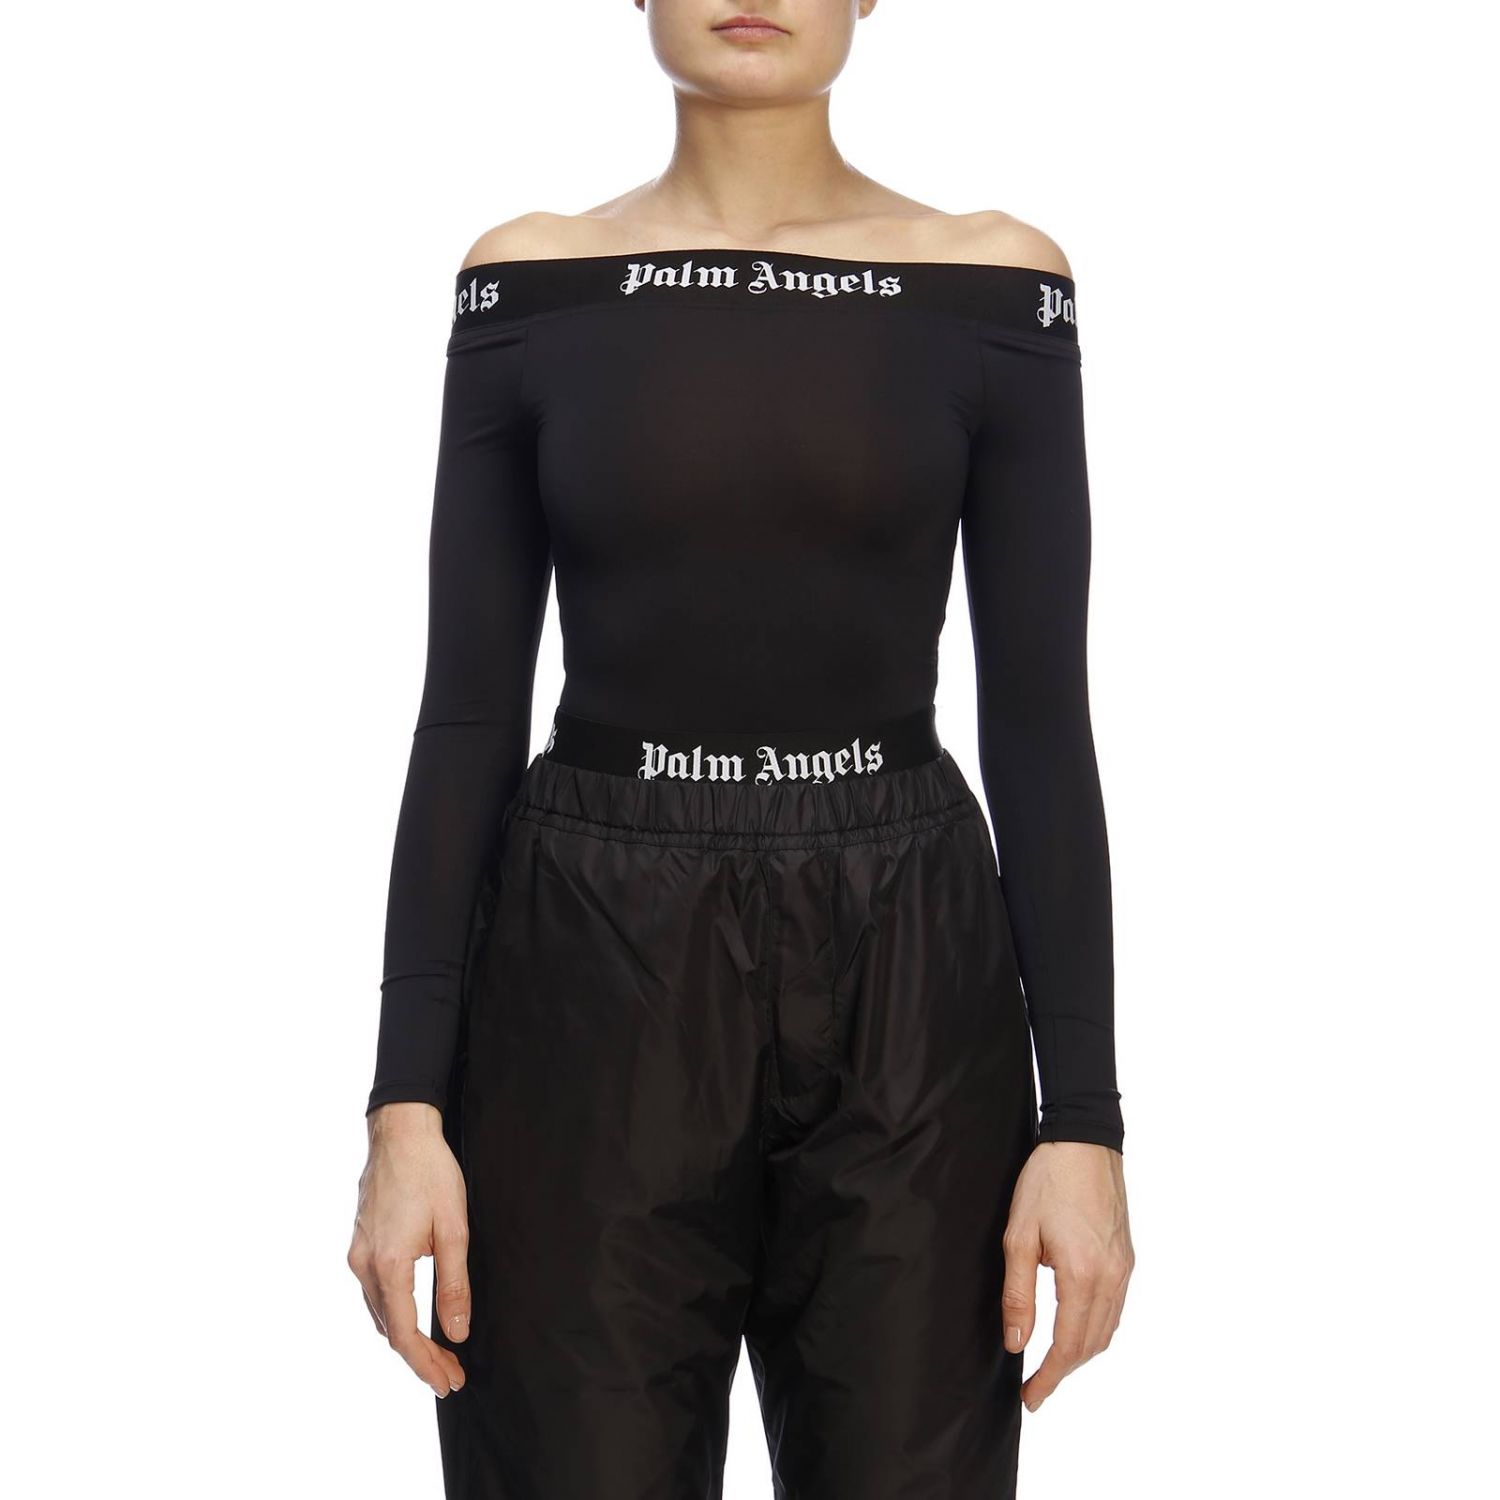 Palm Angels Outlet: Top women - Black ...